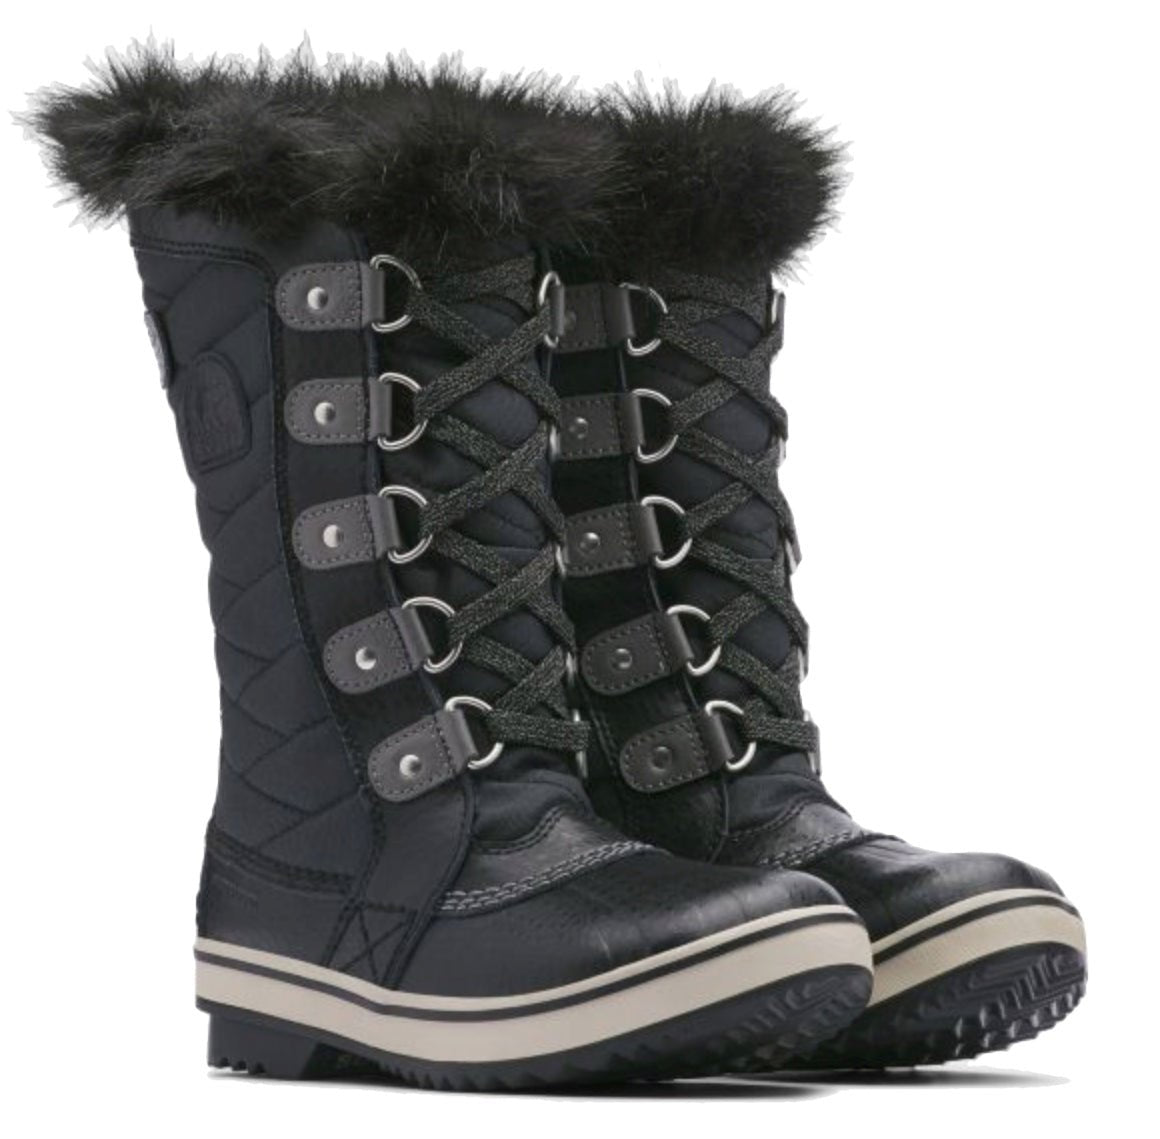 Sorel Youth Tofino II Snow Boots - Mountain Kids Outfitters - Black/Quarry Color - White Background